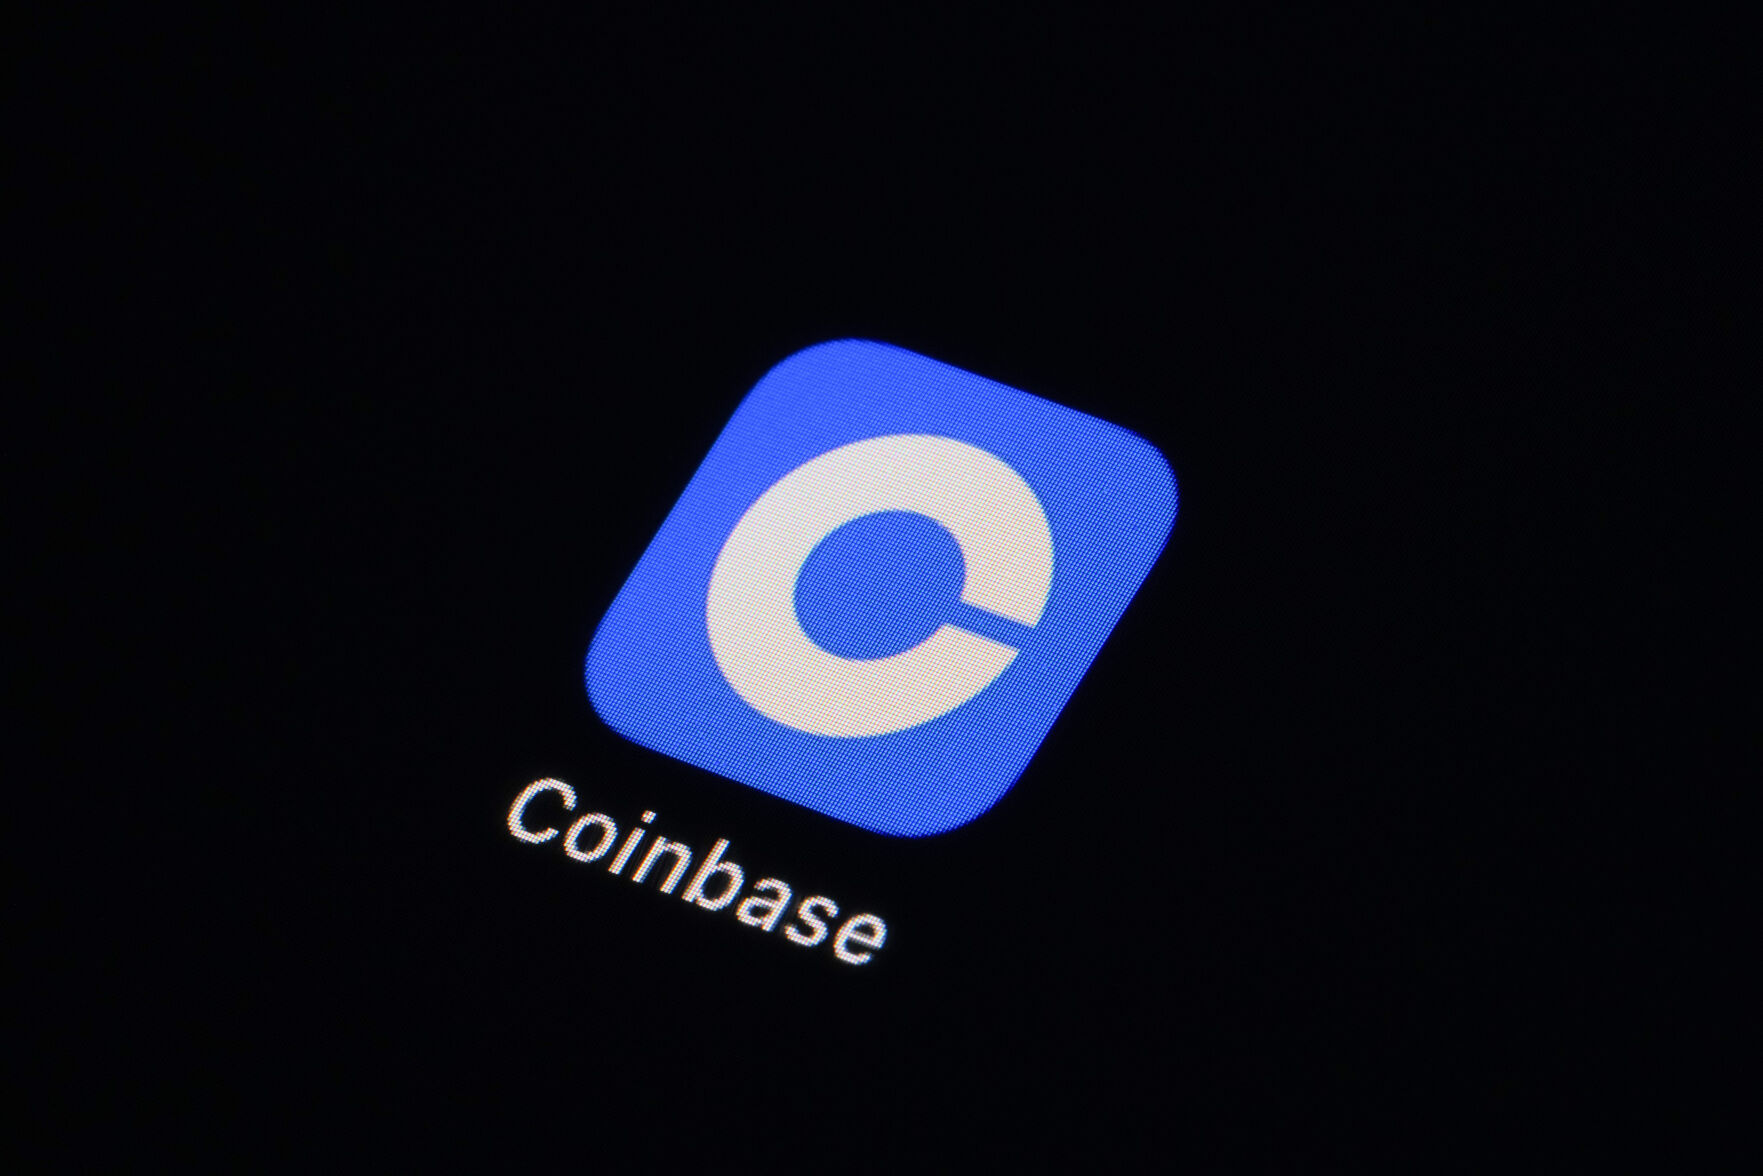 <p>The Coinbase app icon is seen on a smartphone, Tuesday, Feb. 28, 2023, in Marple Township, Pa. Coinbase’s stock is tumbling before the market open on Thursday, March 23, after the cryptocurrency trading platform received a warning from the Securities and Exchange Commission that it could possibly face securities charges. (AP Photo/Matt Slocum)</p>   PHOTO CREDIT: Matt Slocum 